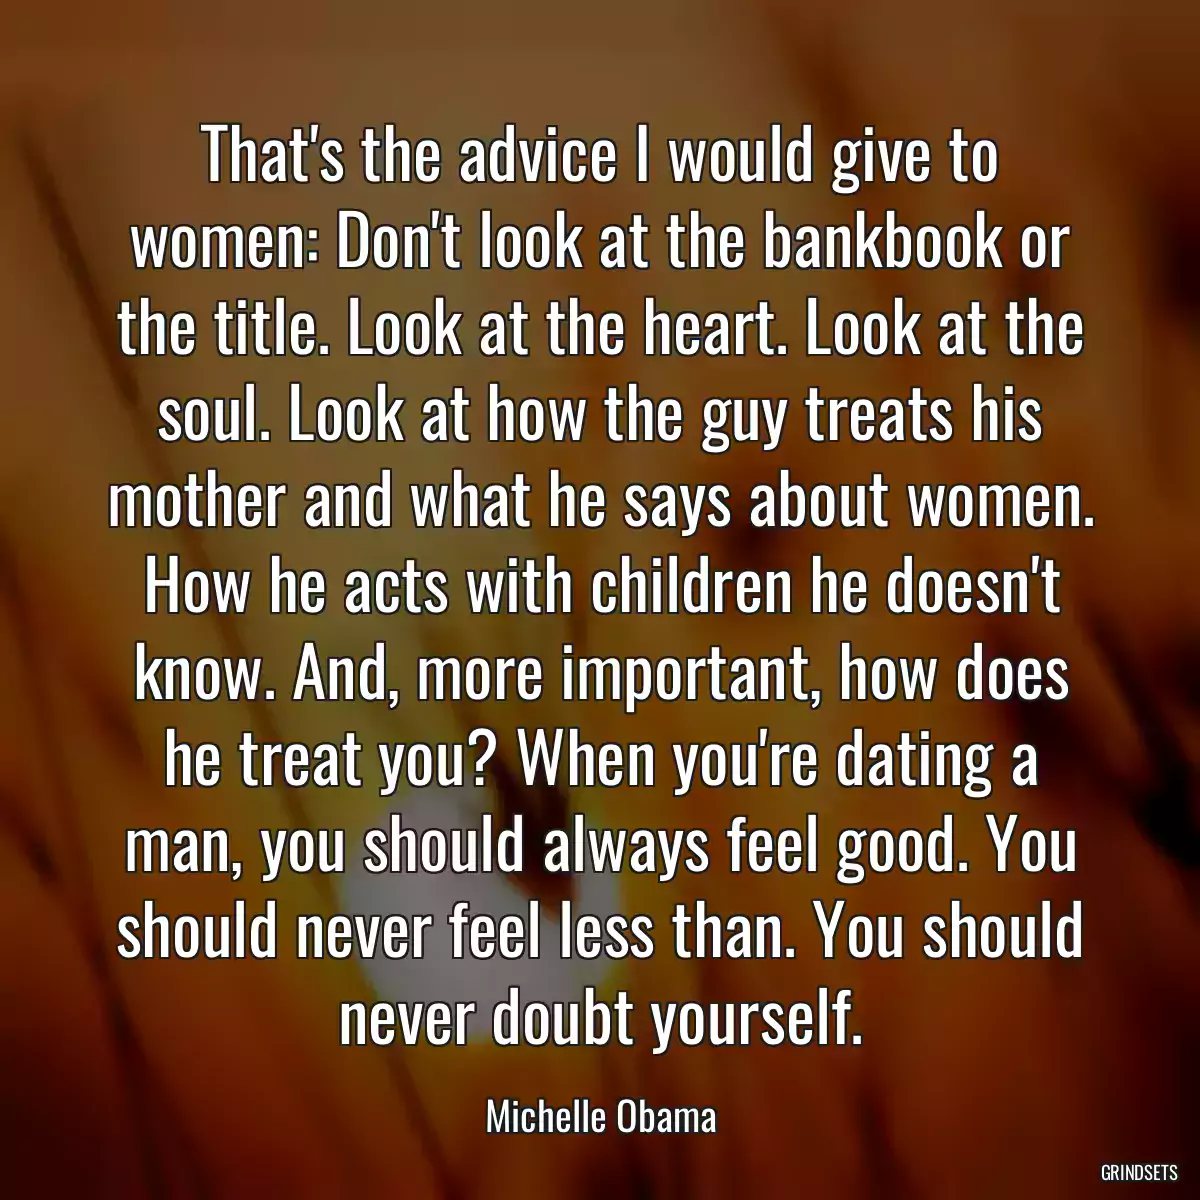 That\'s the advice I would give to women: Don\'t look at the bankbook or the title. Look at the heart. Look at the soul. Look at how the guy treats his mother and what he says about women. How he acts with children he doesn\'t know. And, more important, how does he treat you? When you\'re dating a man, you should always feel good. You should never feel less than. You should never doubt yourself.